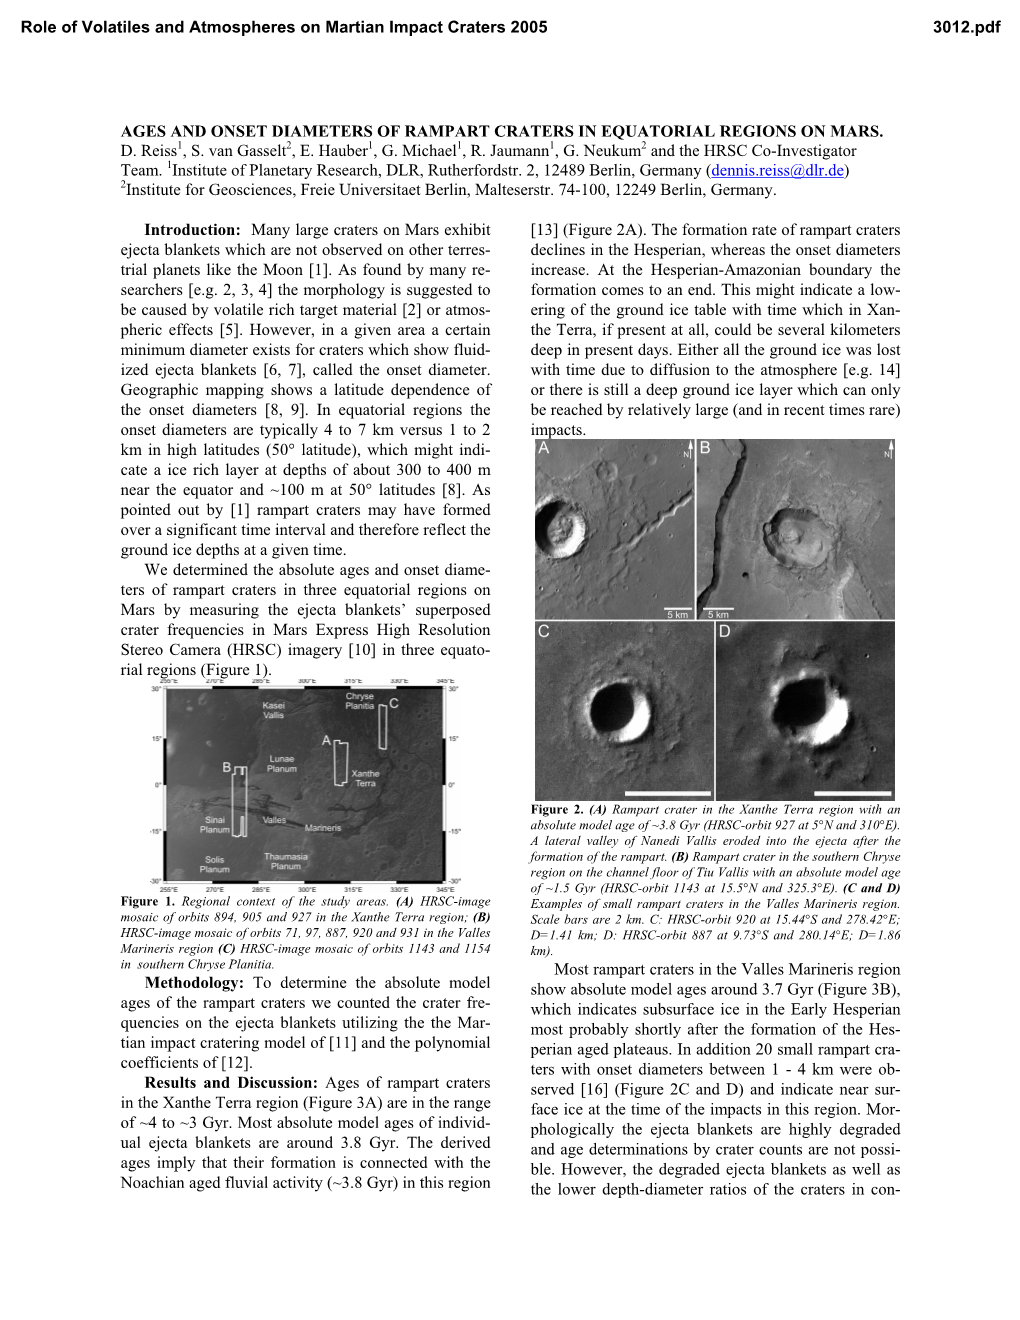 Ages and Onset Diameters of Rampart Craters in Equatorial Regions on Mars